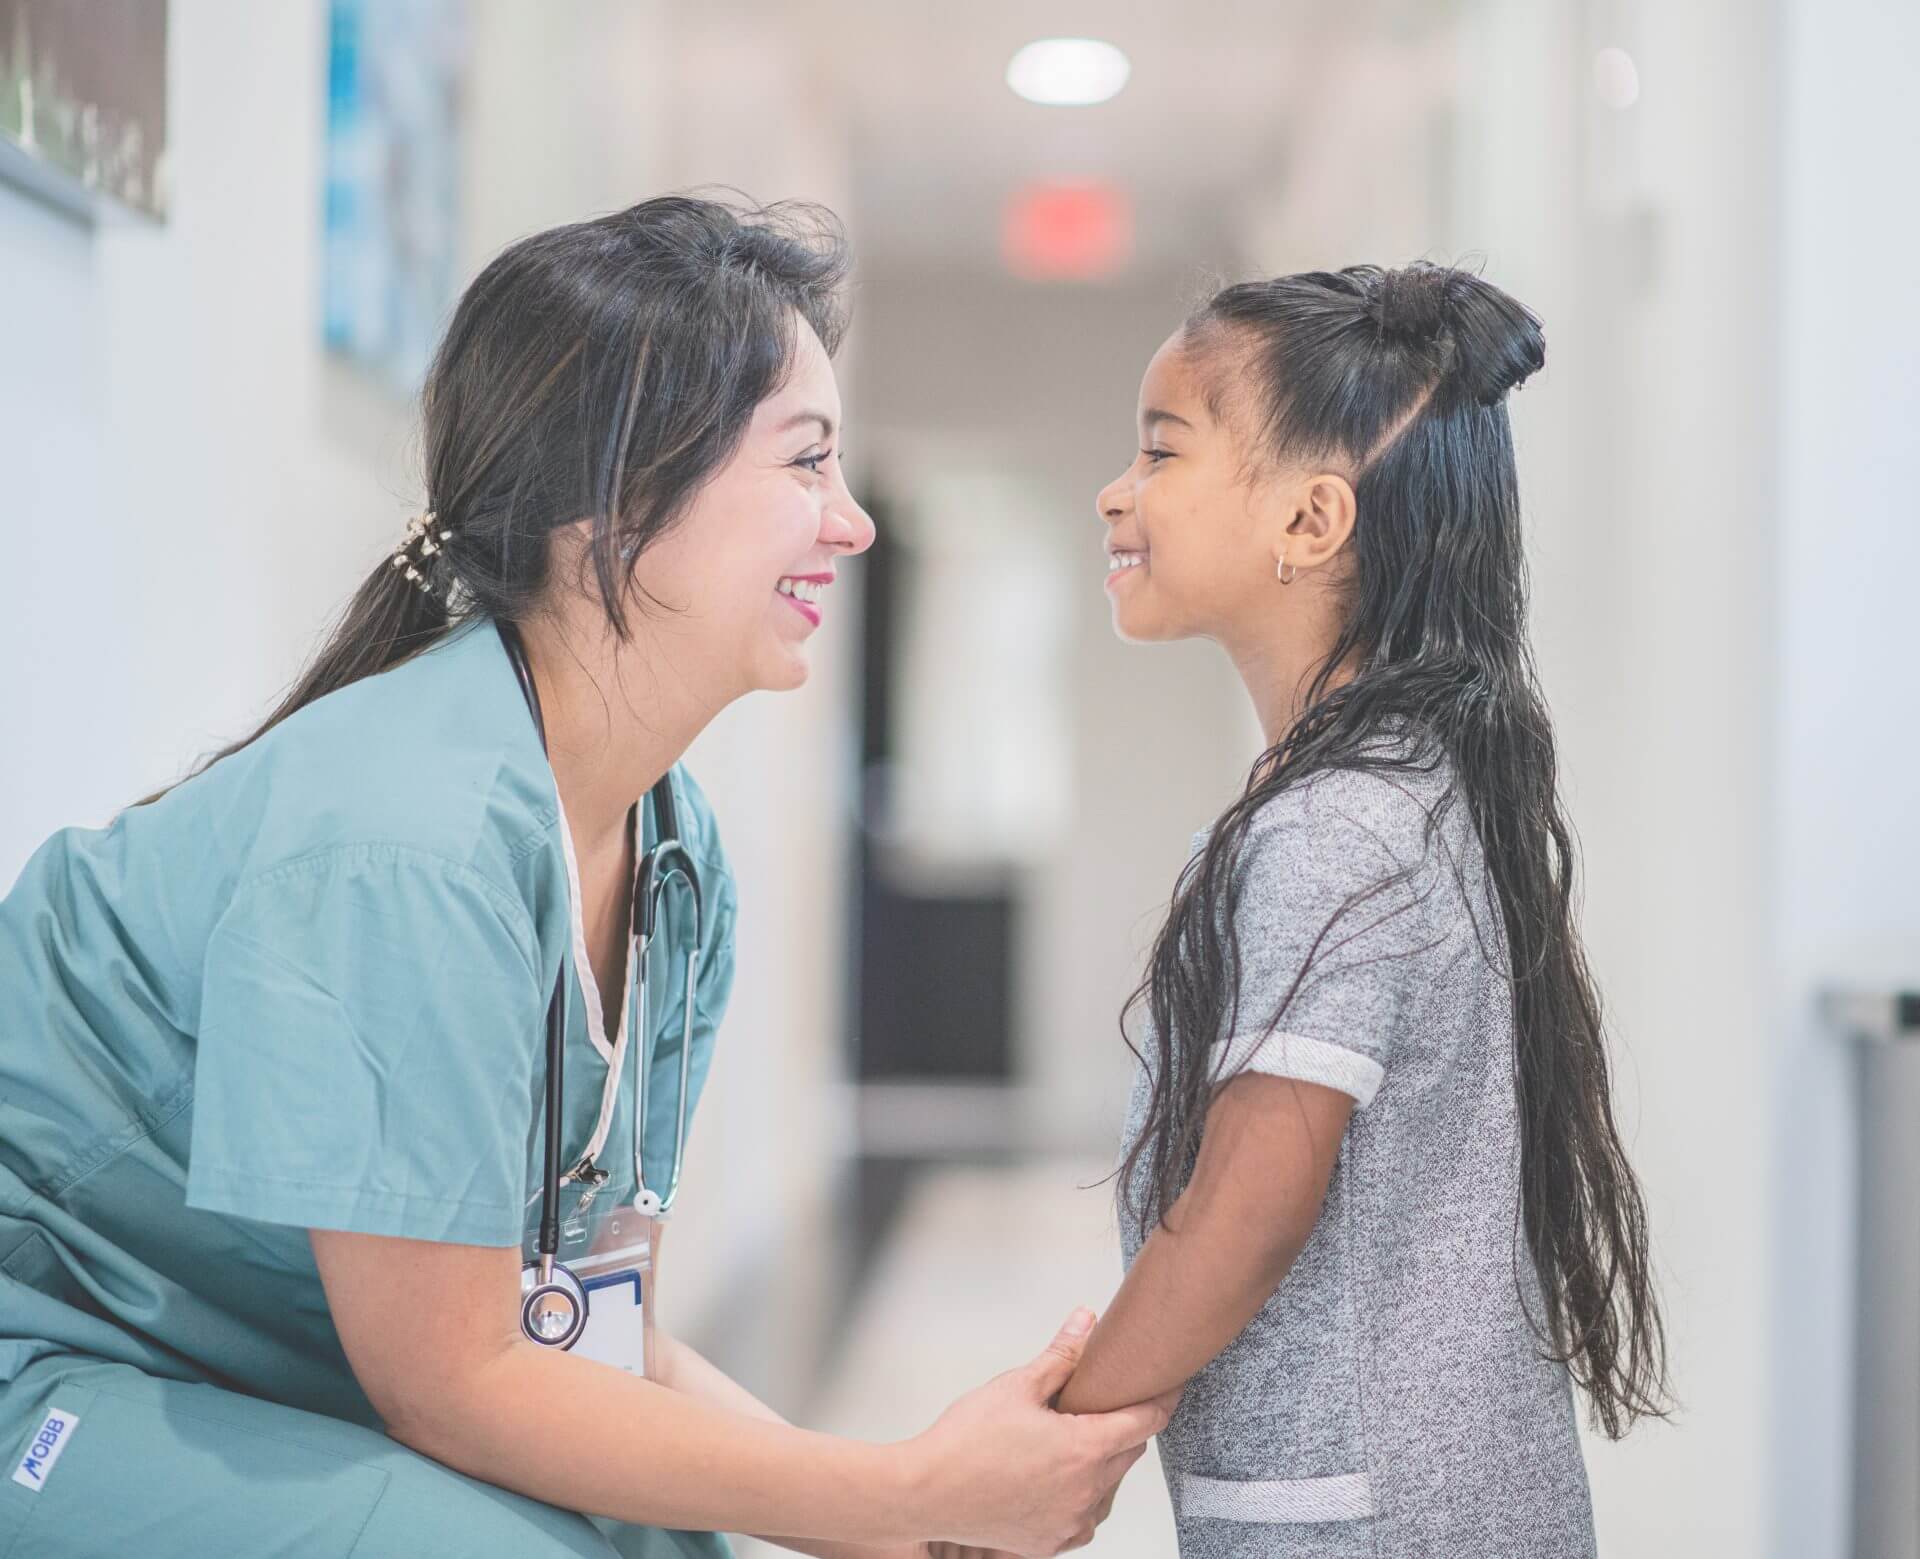 Nurse at eye level with adorable little girl smiling and looking each other in the eyes